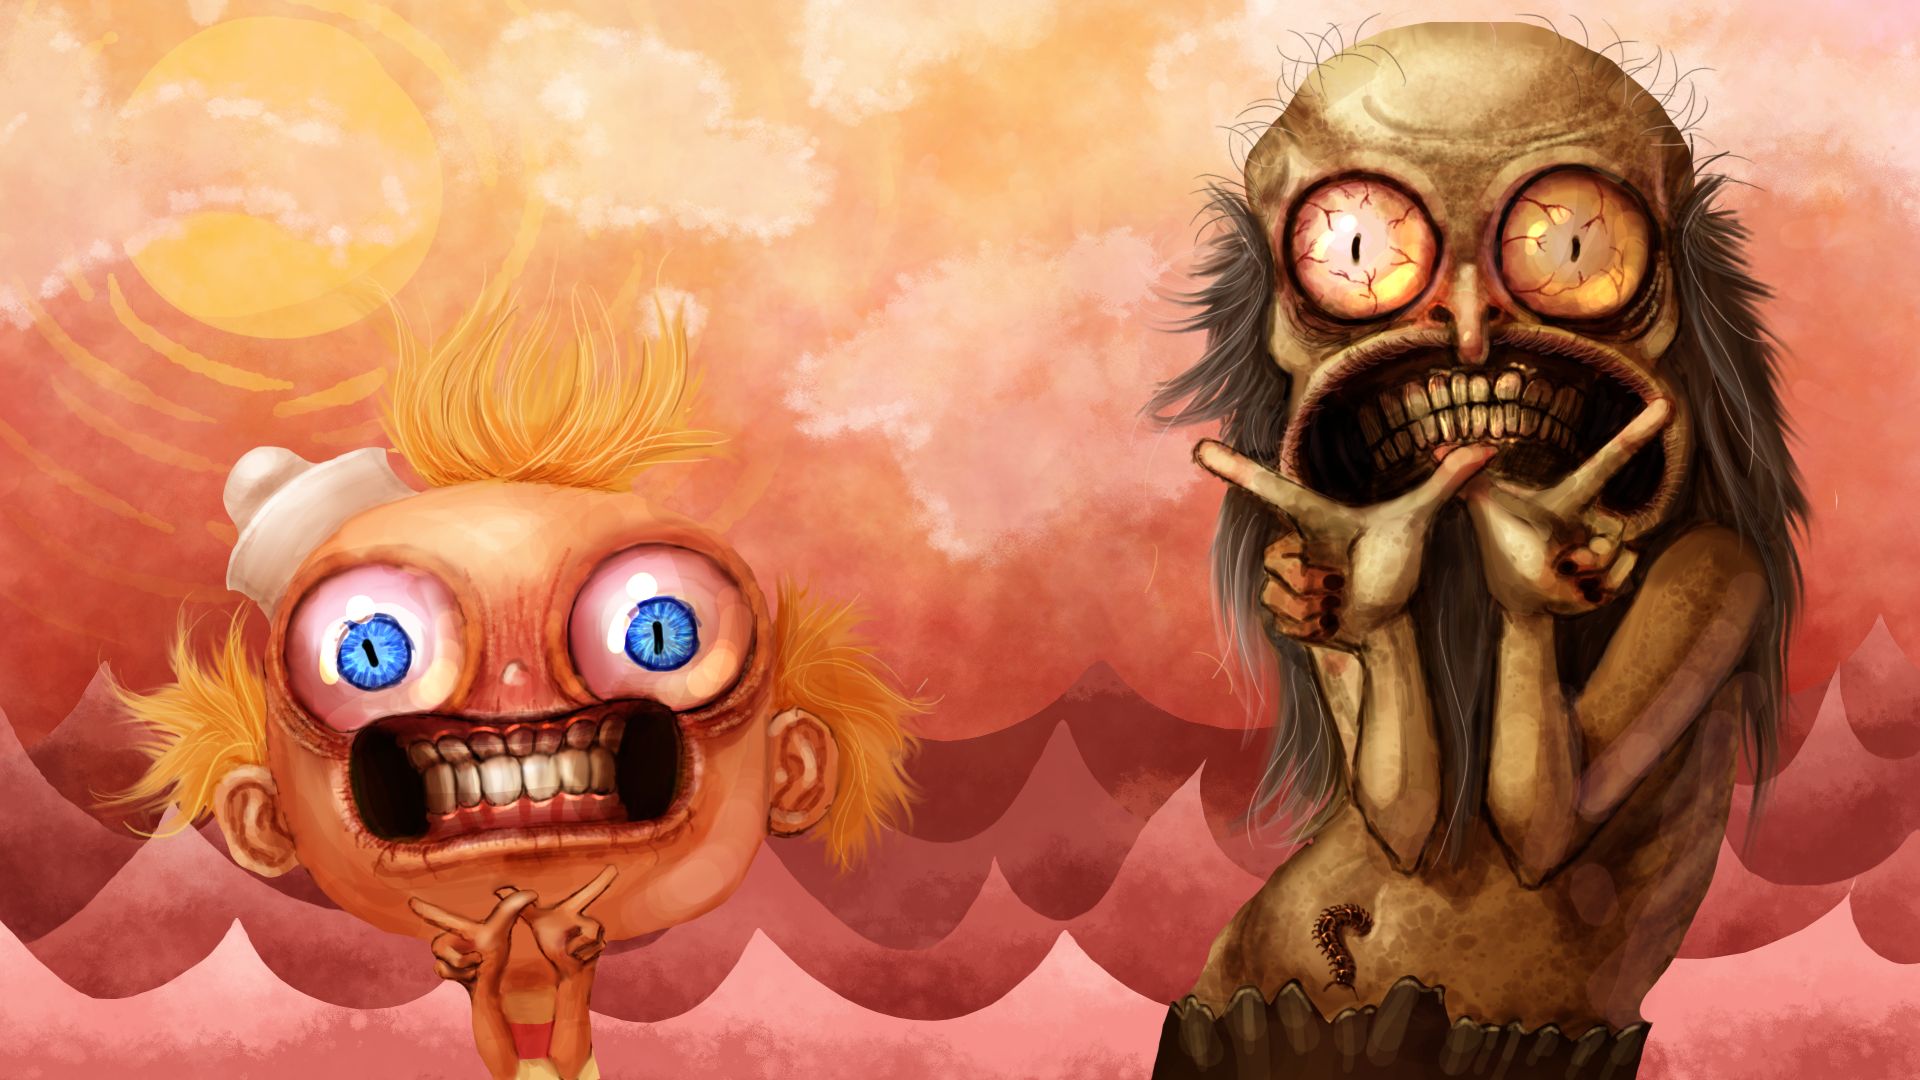 Free Images the marvelous misadventures of flapjack, tv show, surreal, horror Creepy